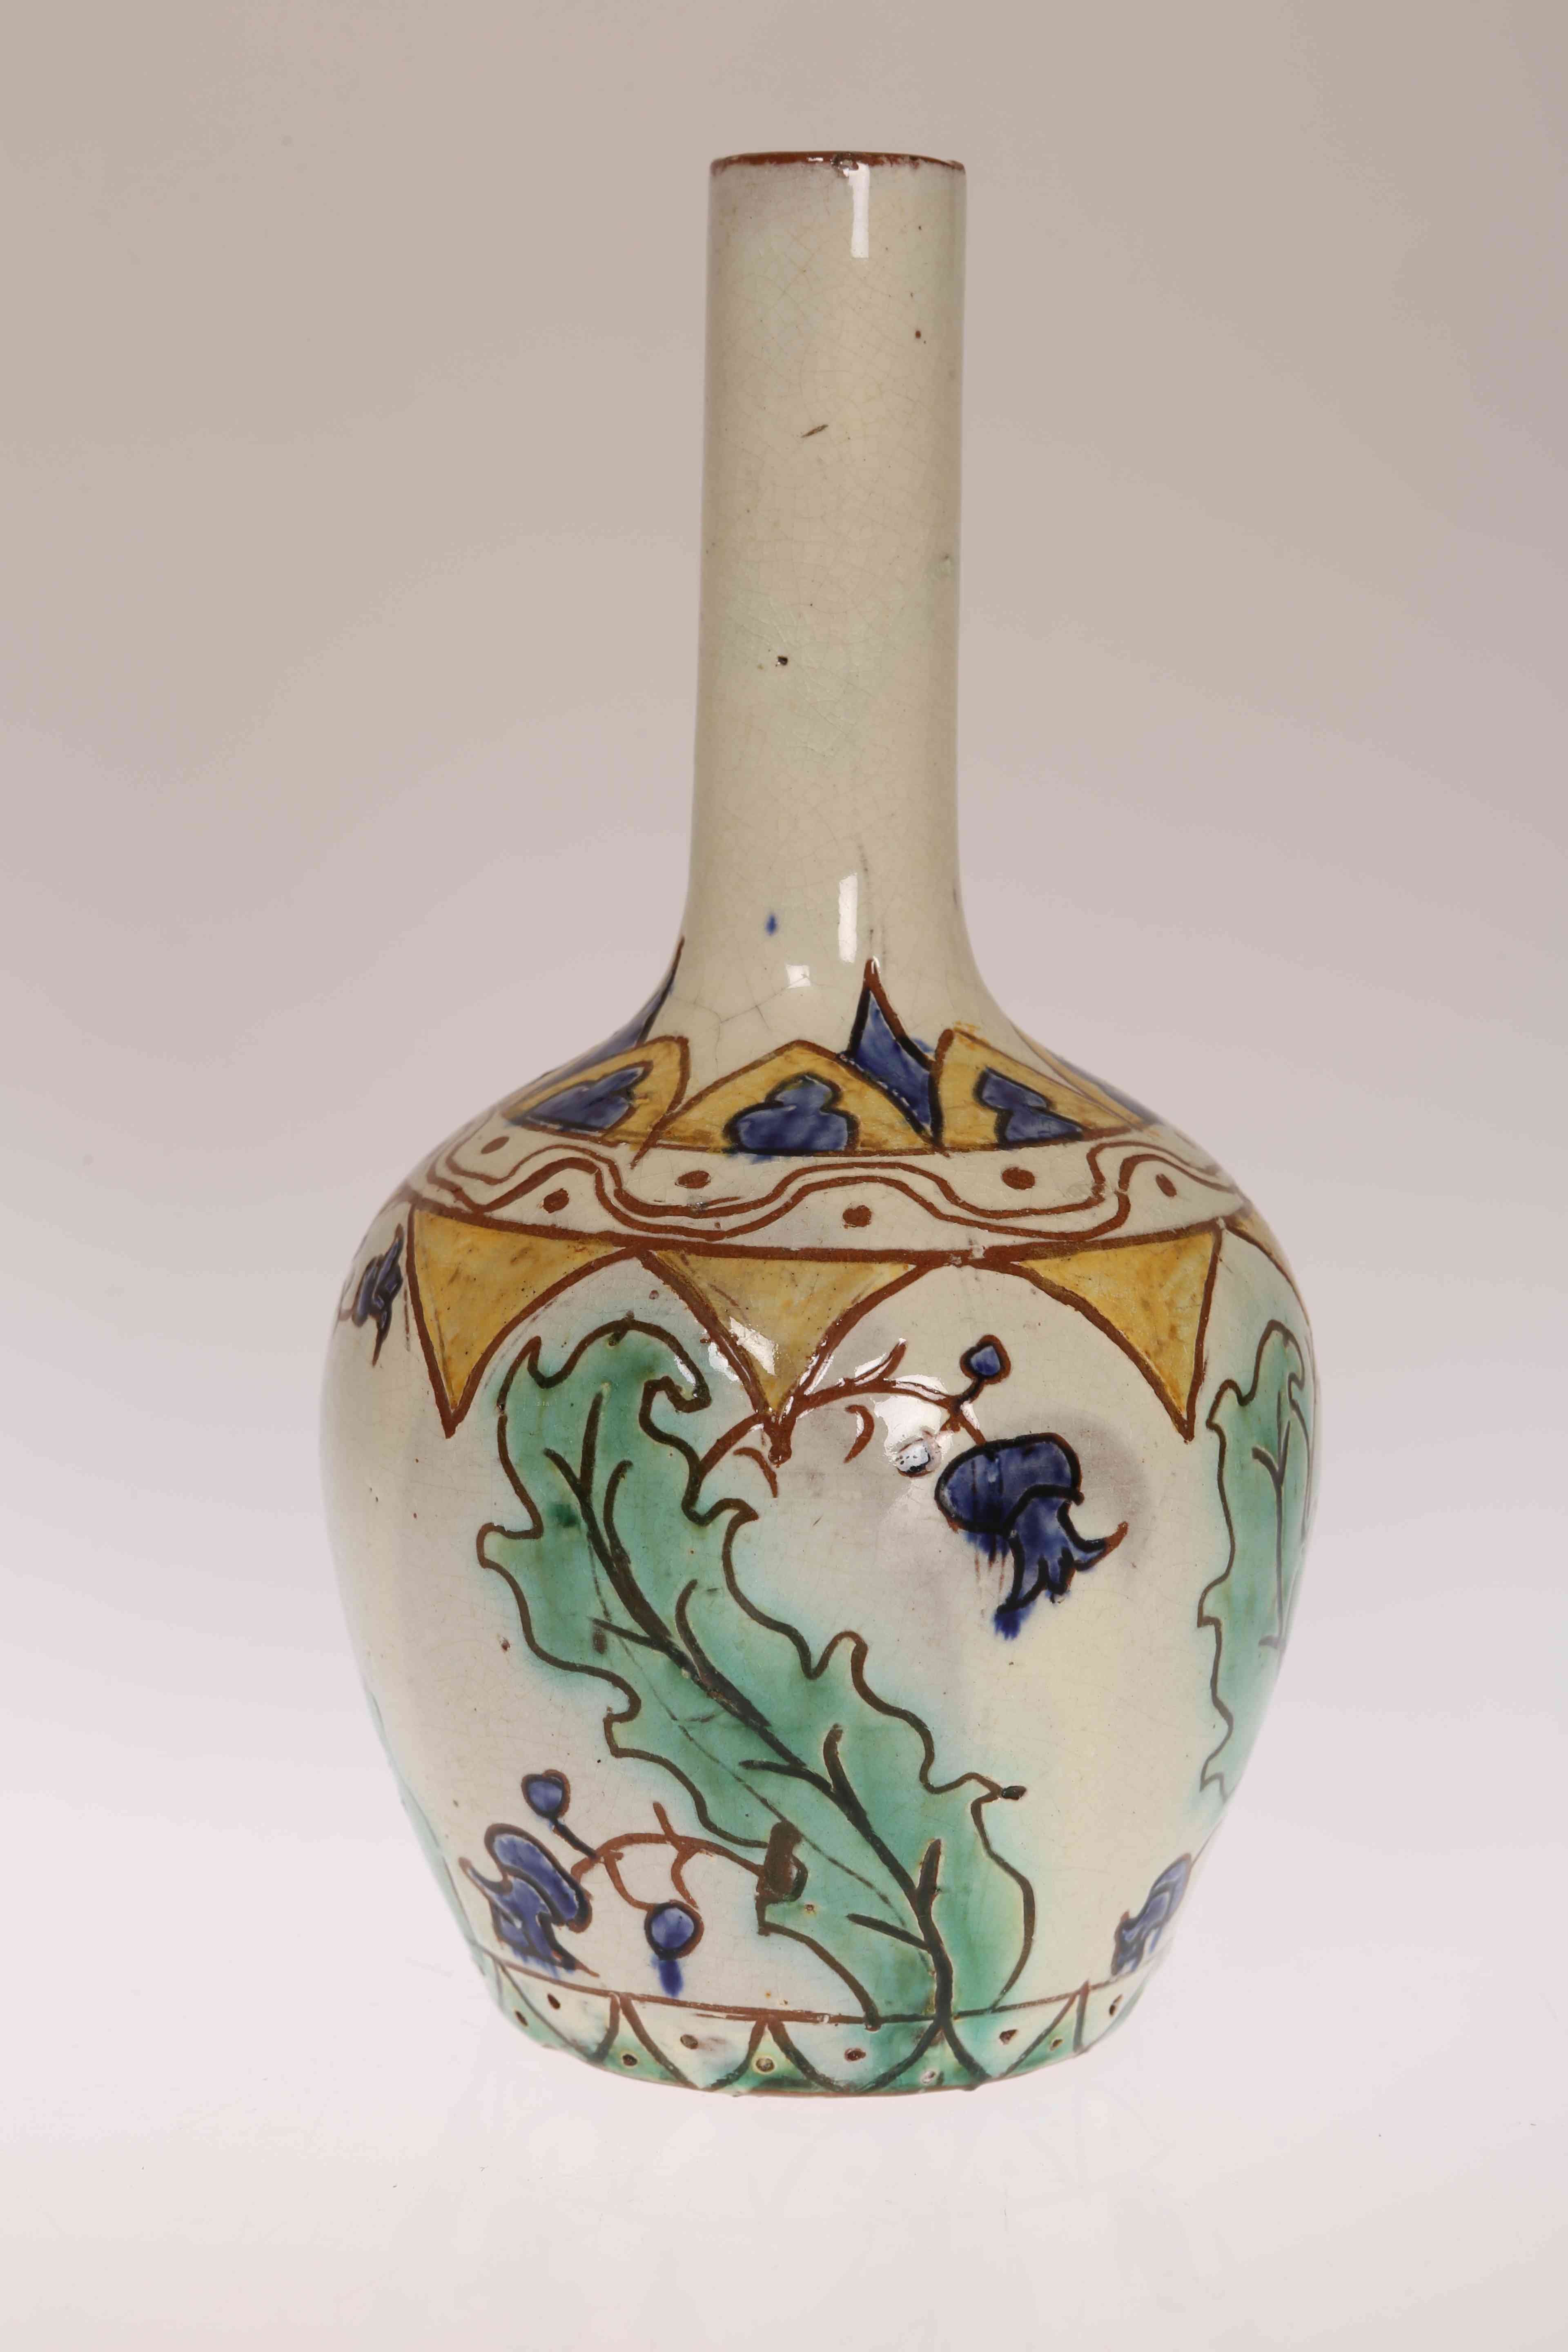 CARLO MANZONI, AN ARTS AND CRAFTS POTTERY VASE, the ovoid body issuing a cylindrical neck,